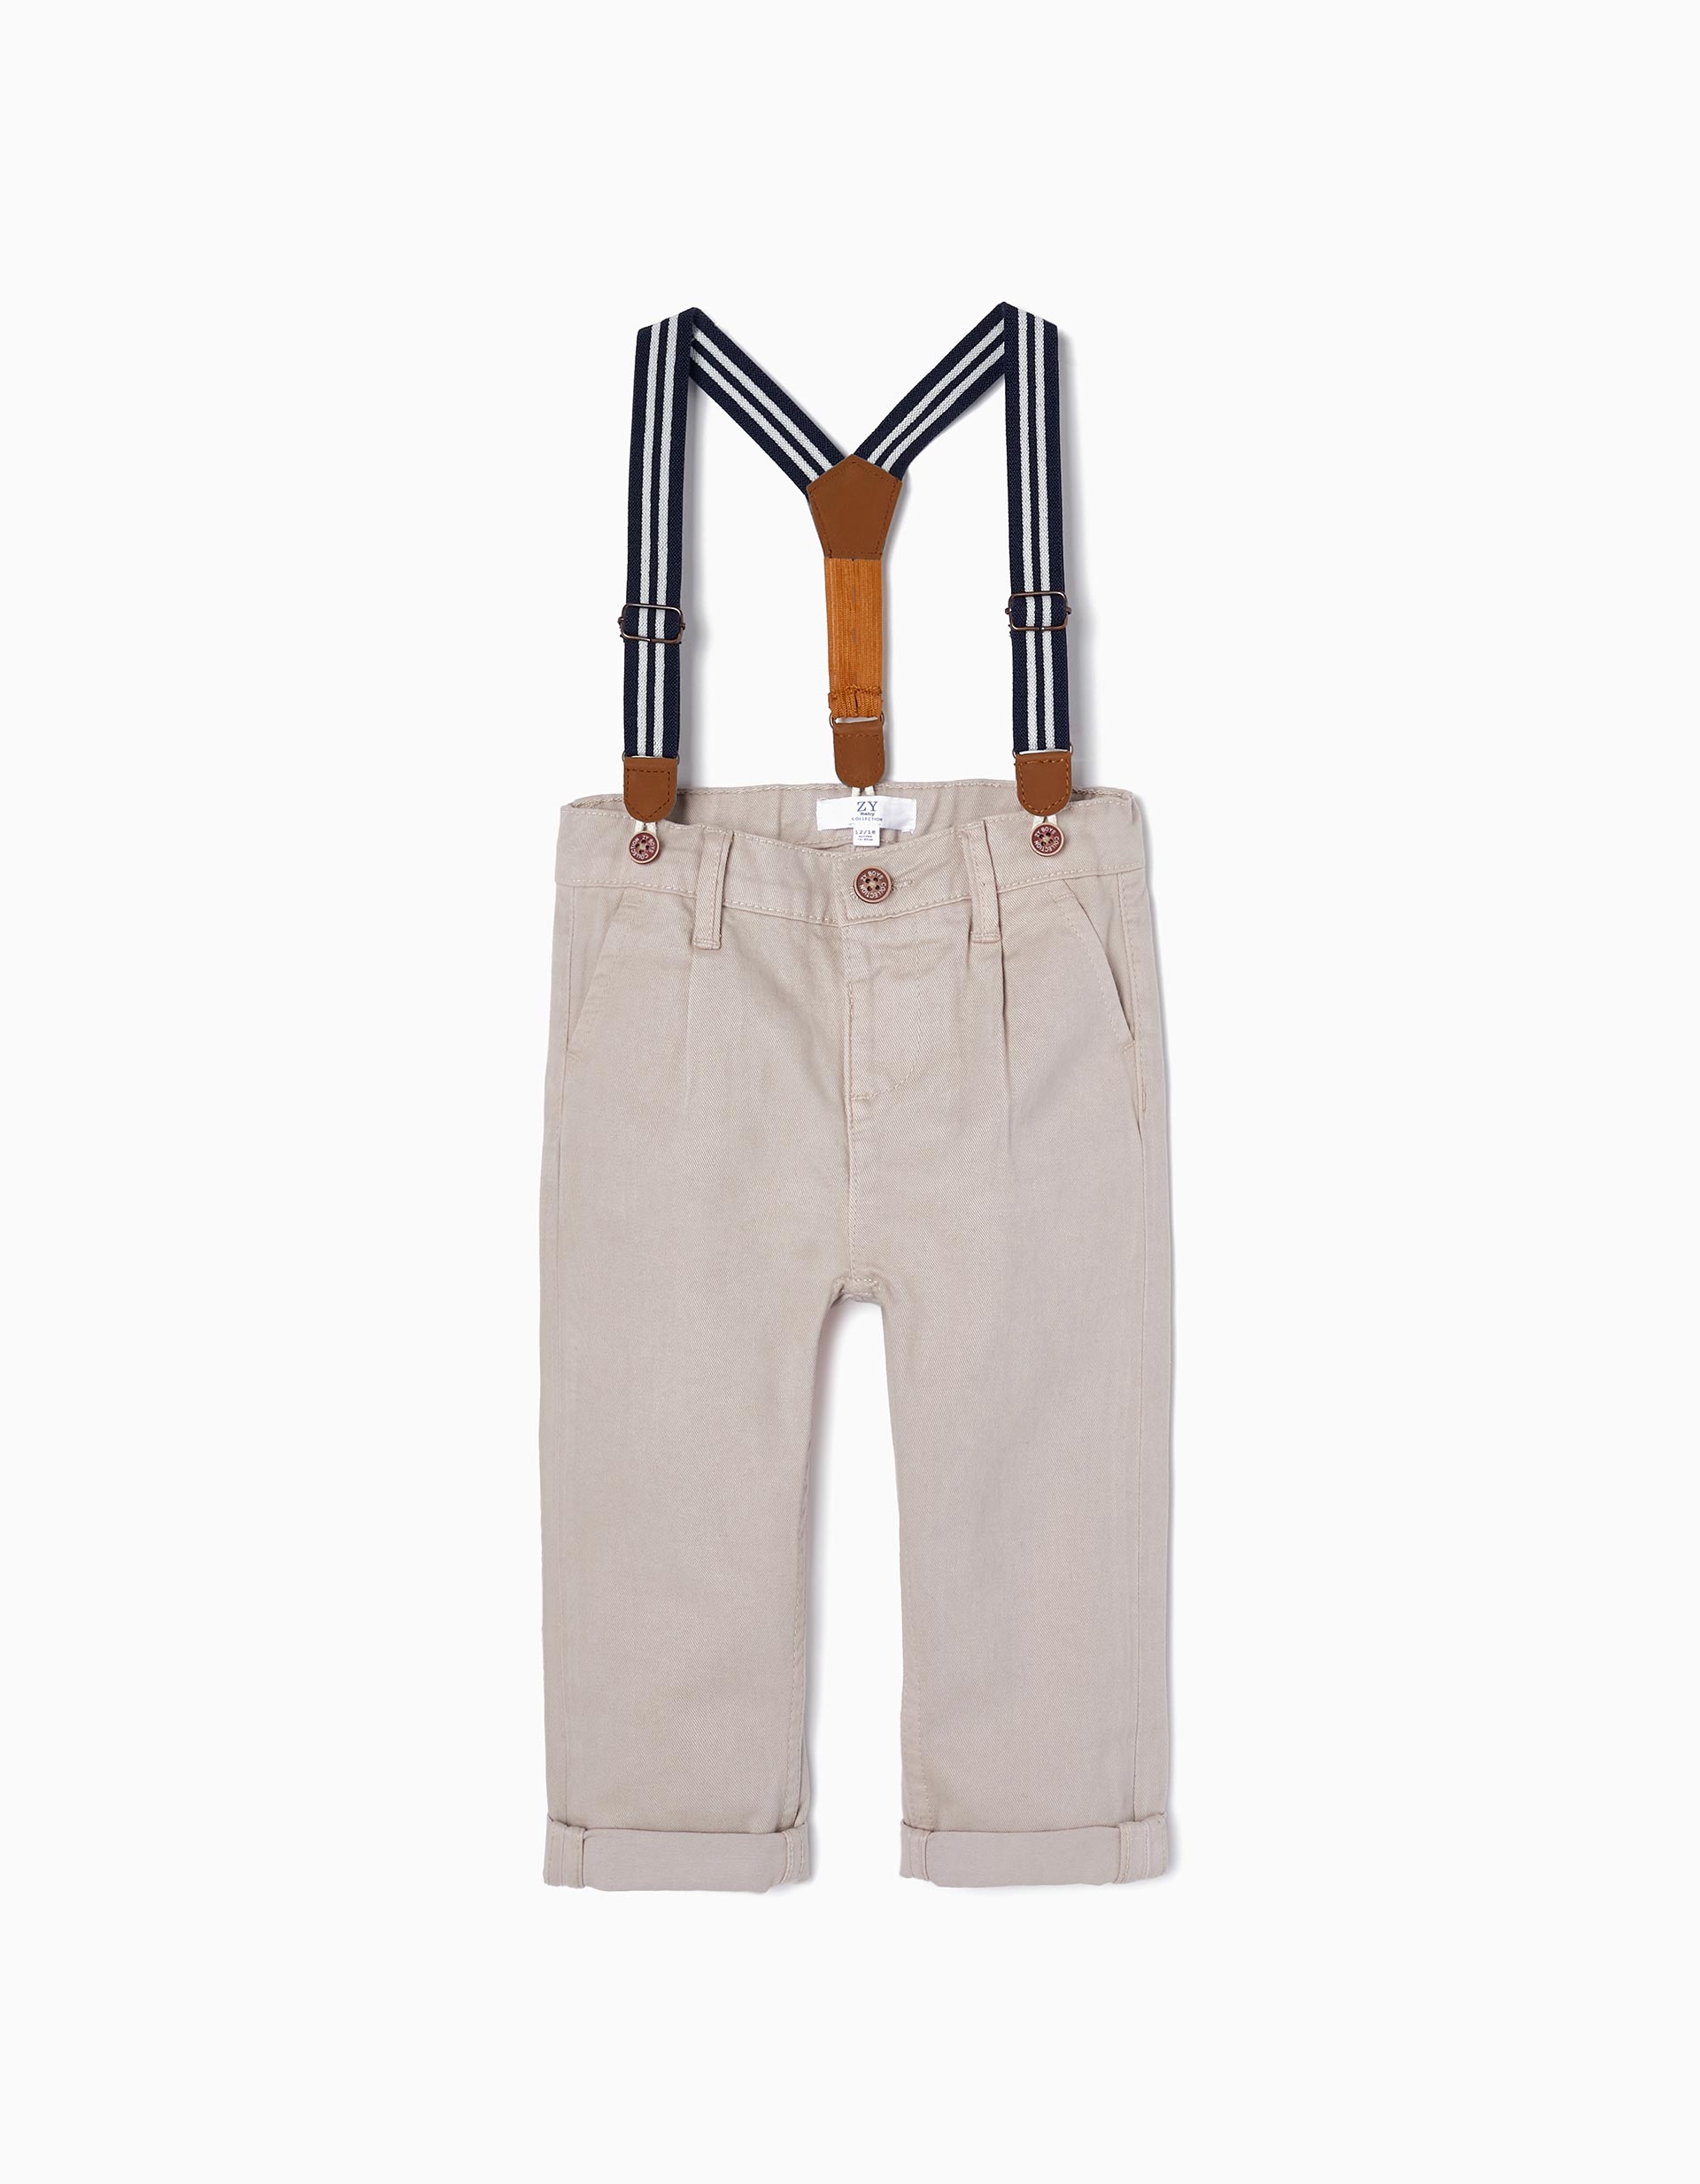 Buy Kids Linen Trousers With Braces Kids Linen Pants Online in India  Etsy